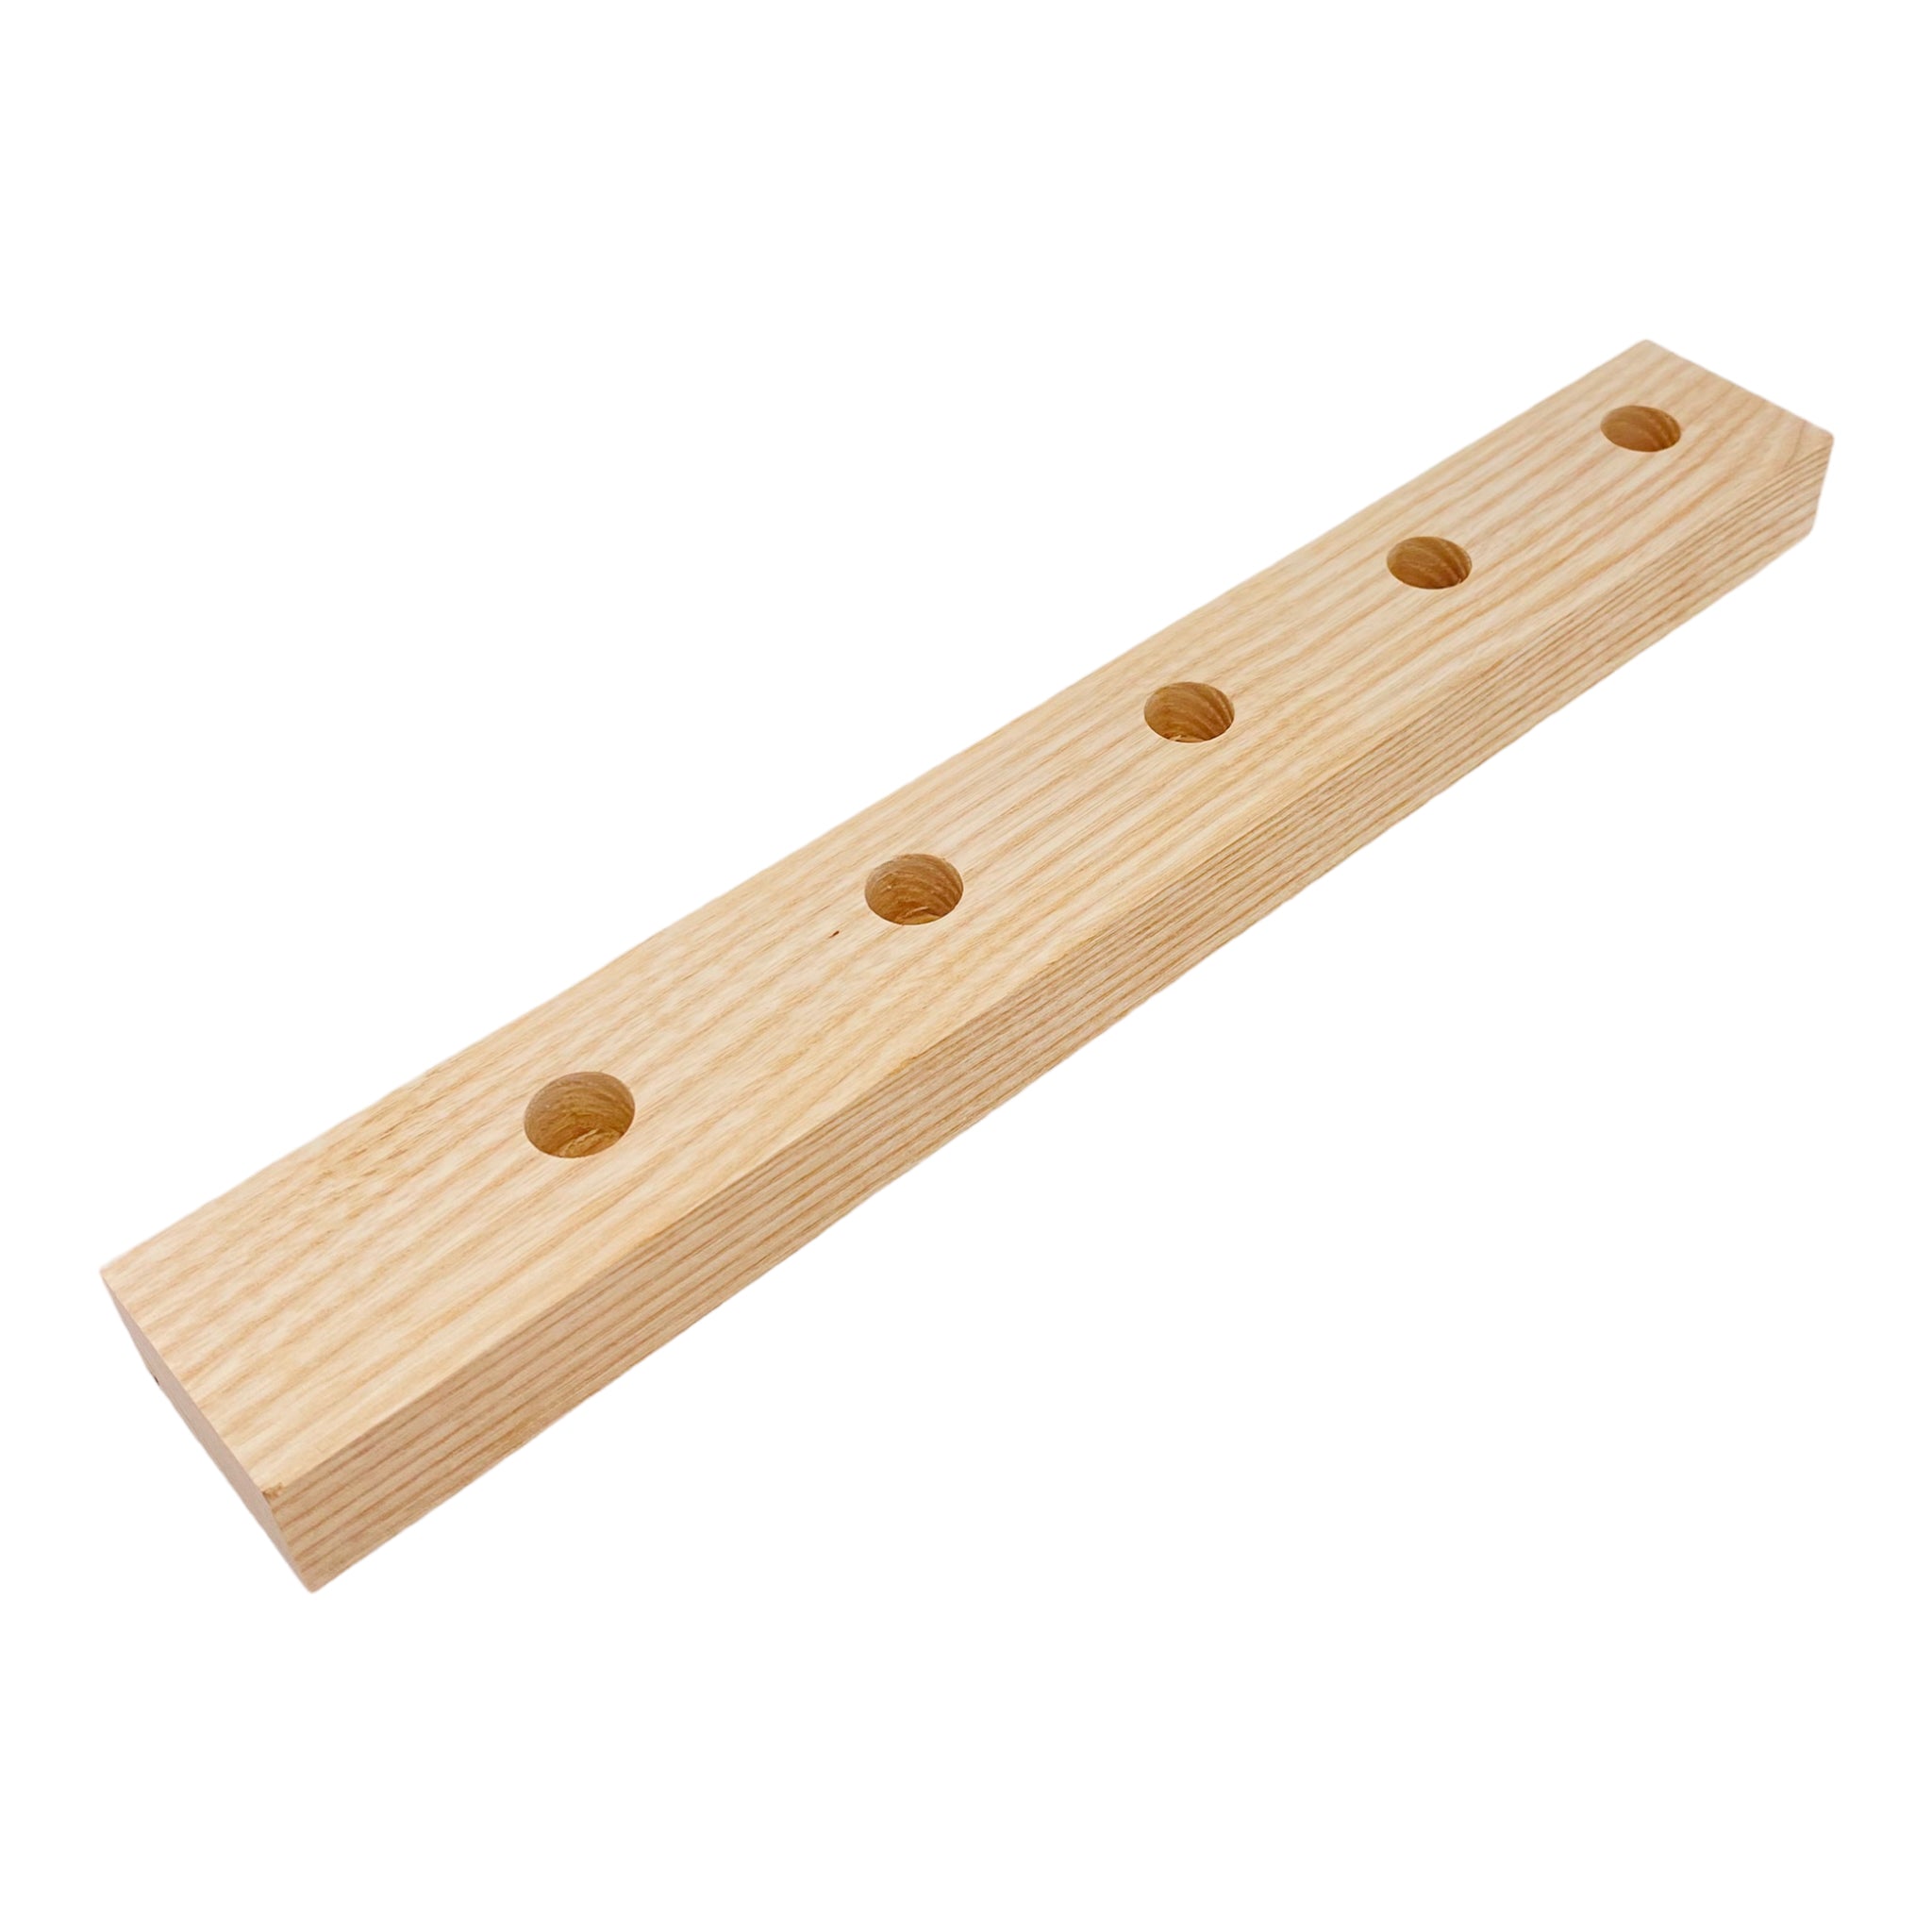 5 Hole Wood Display Stand Holder For 14mm Bong Bowl Pieces Or Quartz Bangers - Cedar